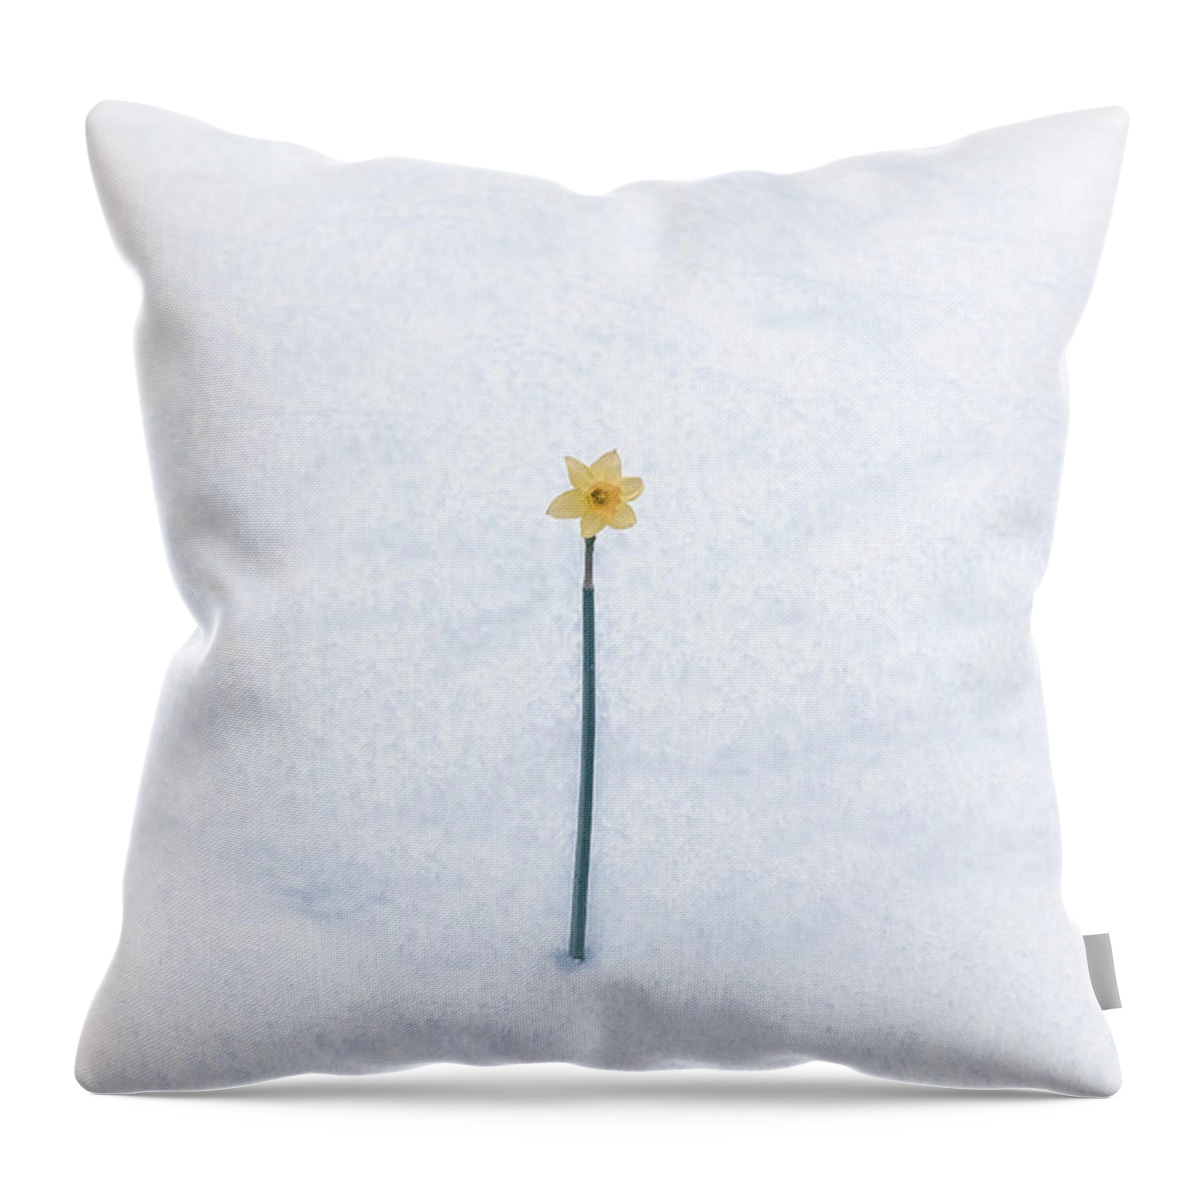 Daffodil Throw Pillow featuring the photograph Almost Spring by Joana Kruse